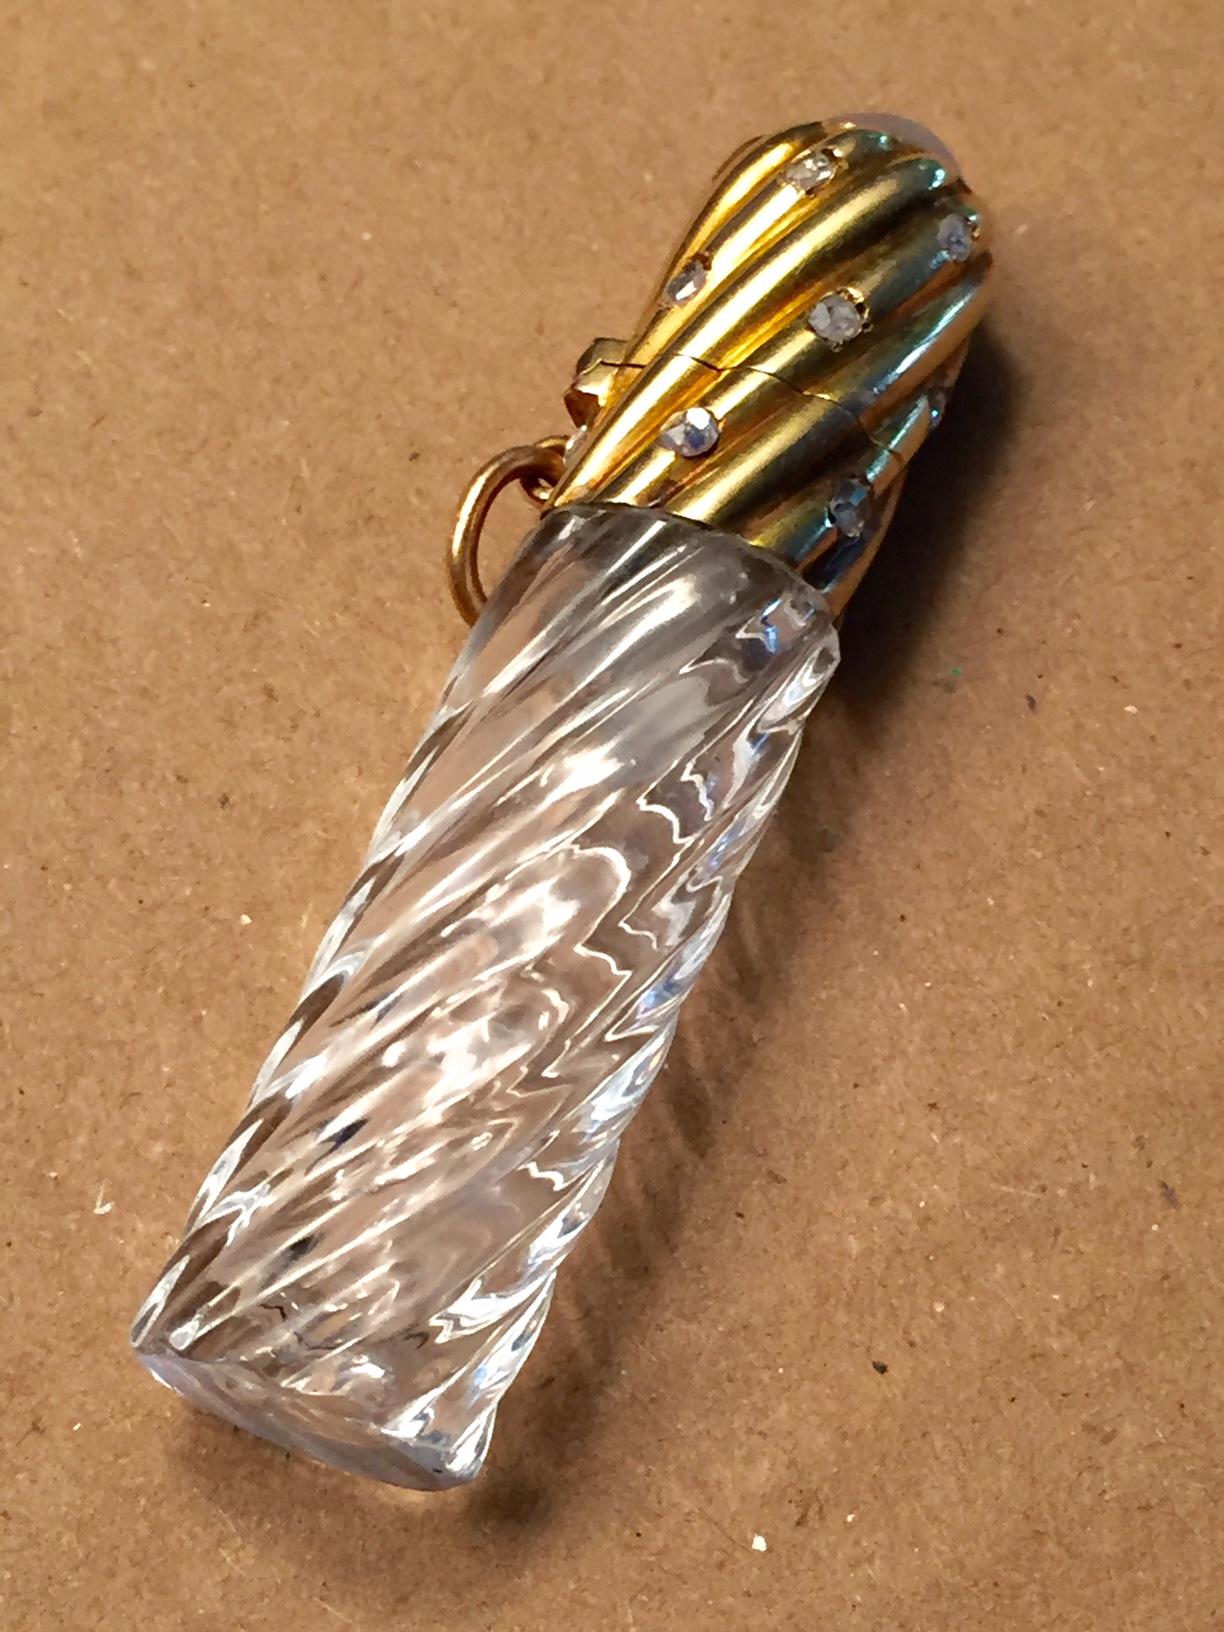 A ribbed crystal bottle is topped by a matching 18k gold ribbed section set with rose cut diamonds and finished with a star sapphire on top. There is a stopper inside and a loop on one side to use if you want to suspend the vial from a gold chain or